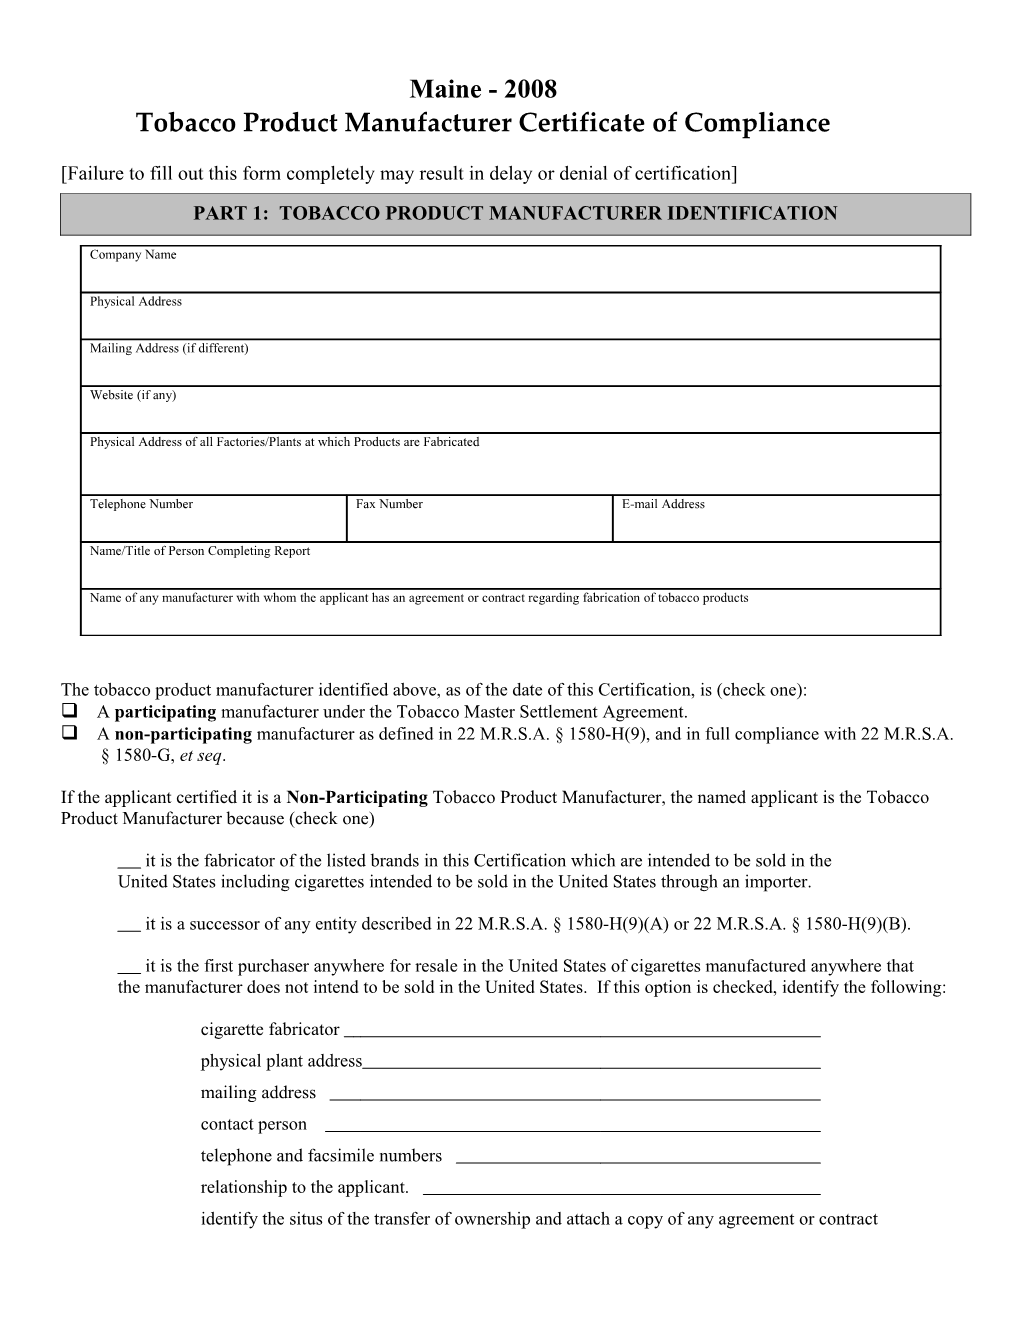 Failure to Fill out This Form Completely May Result in Delay Or Denial of Certification